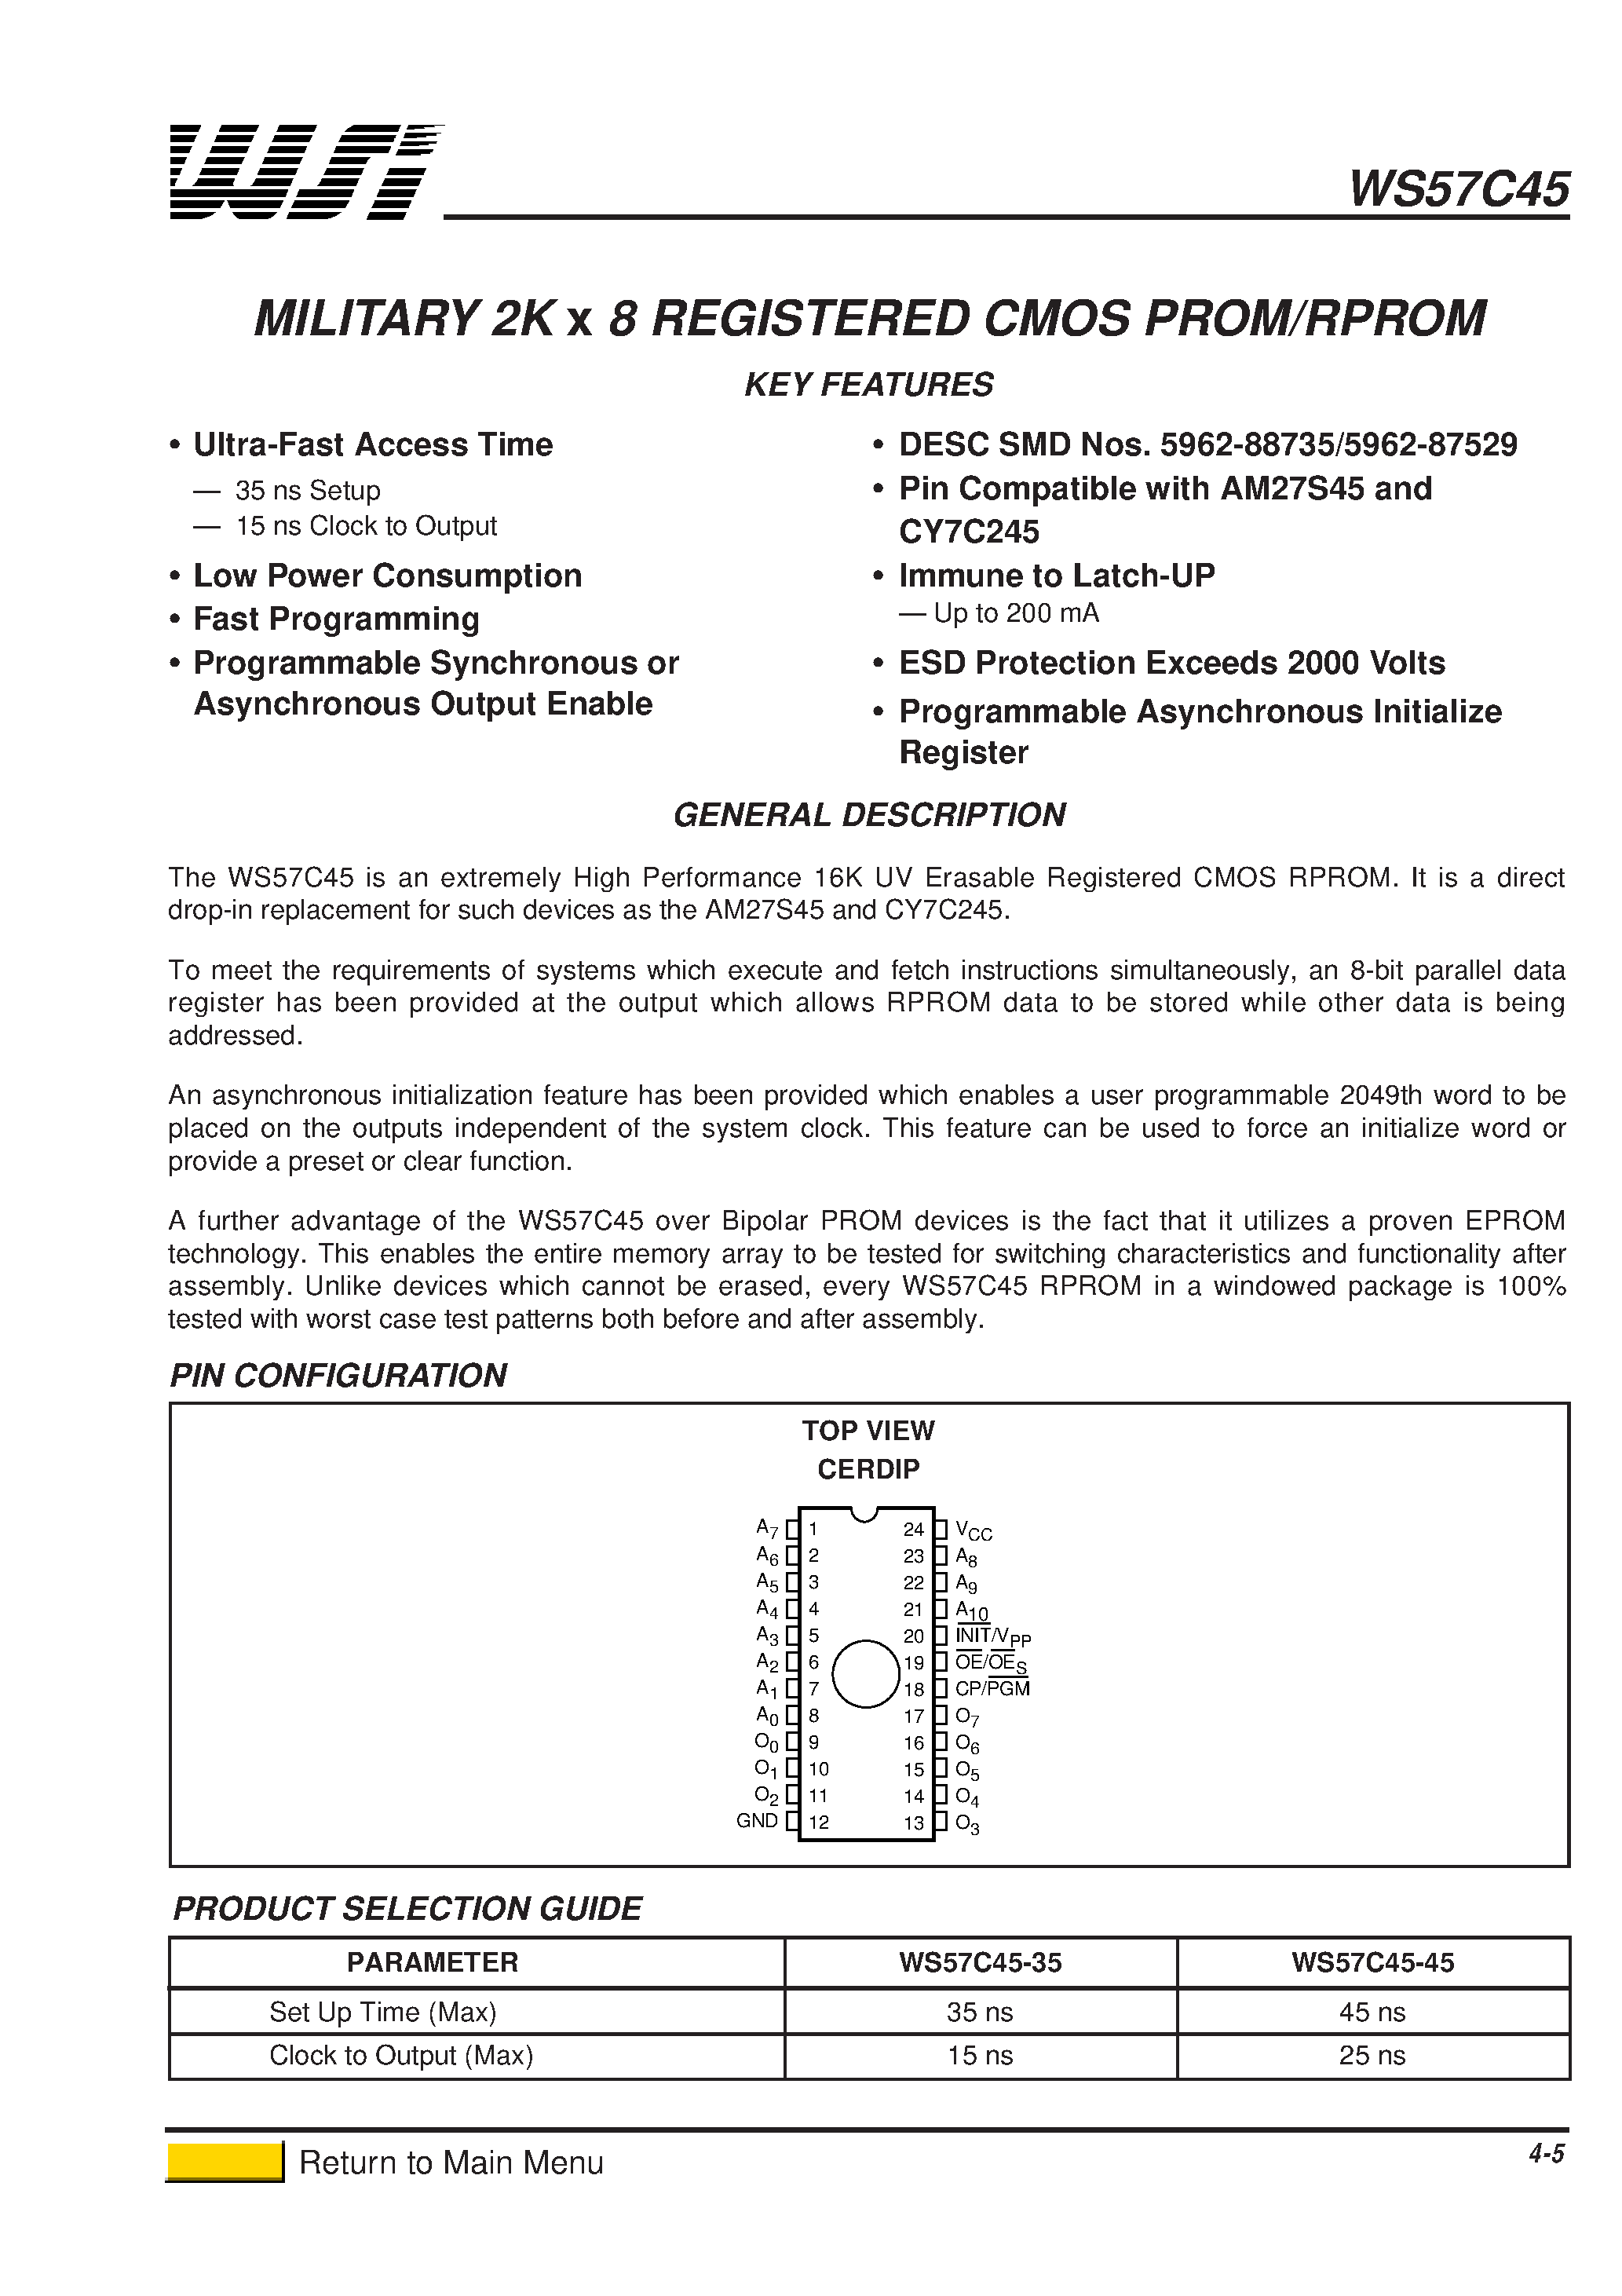 Datasheet WS57C45-1 - MILITARY 2K x 8 REGISTERED CMOS PROM/RPROM page 1